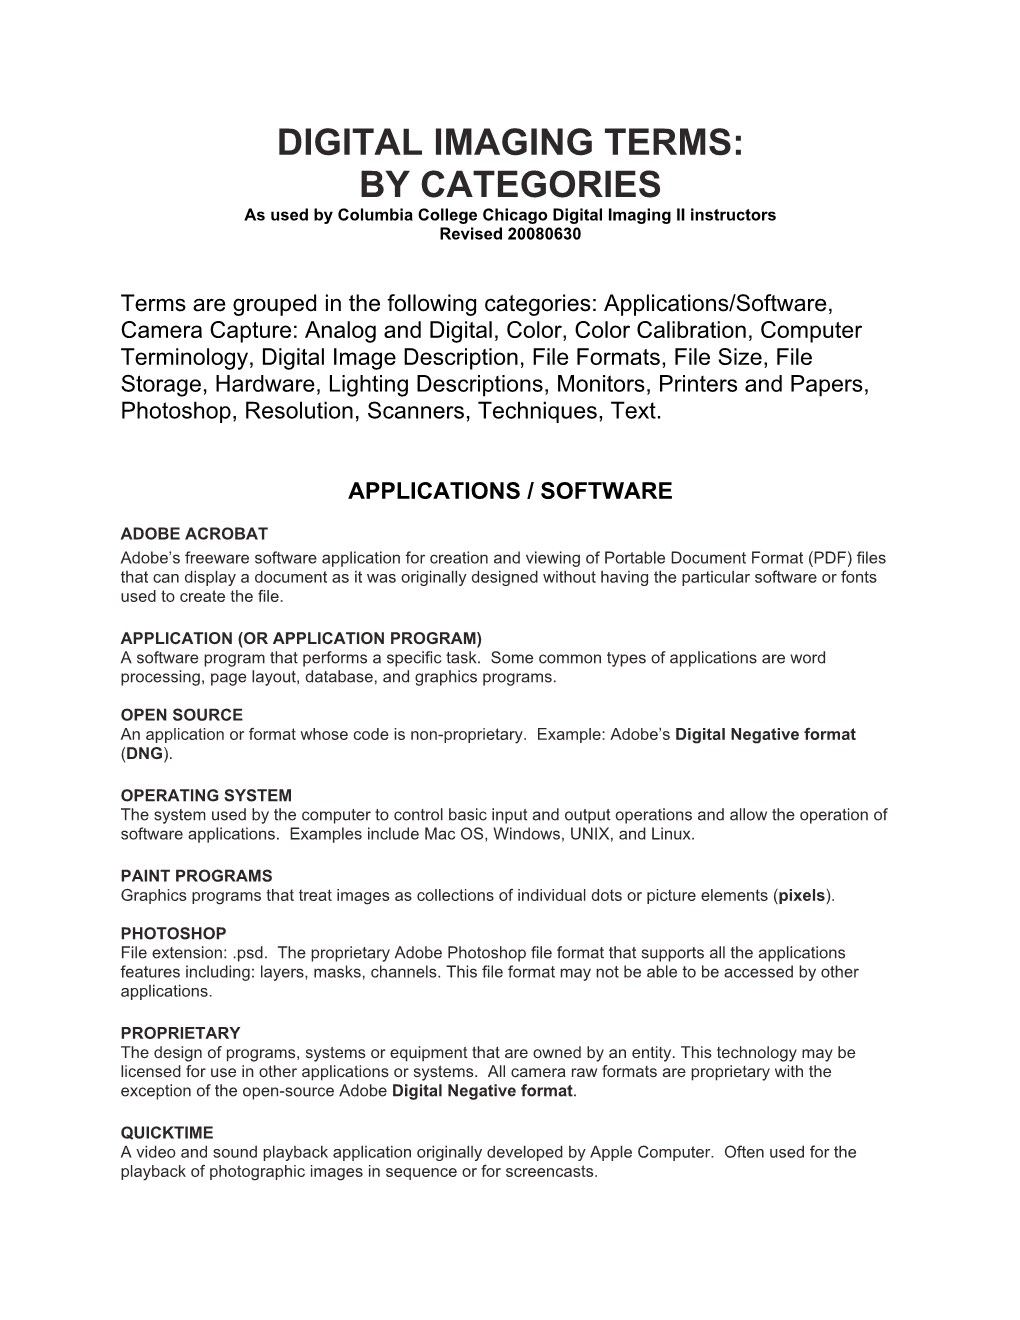 DIGITAL IMAGING TERMS: by CATEGORIES As Used by Columbia College Chicago Digital Imaging II Instructors Revised 20080630